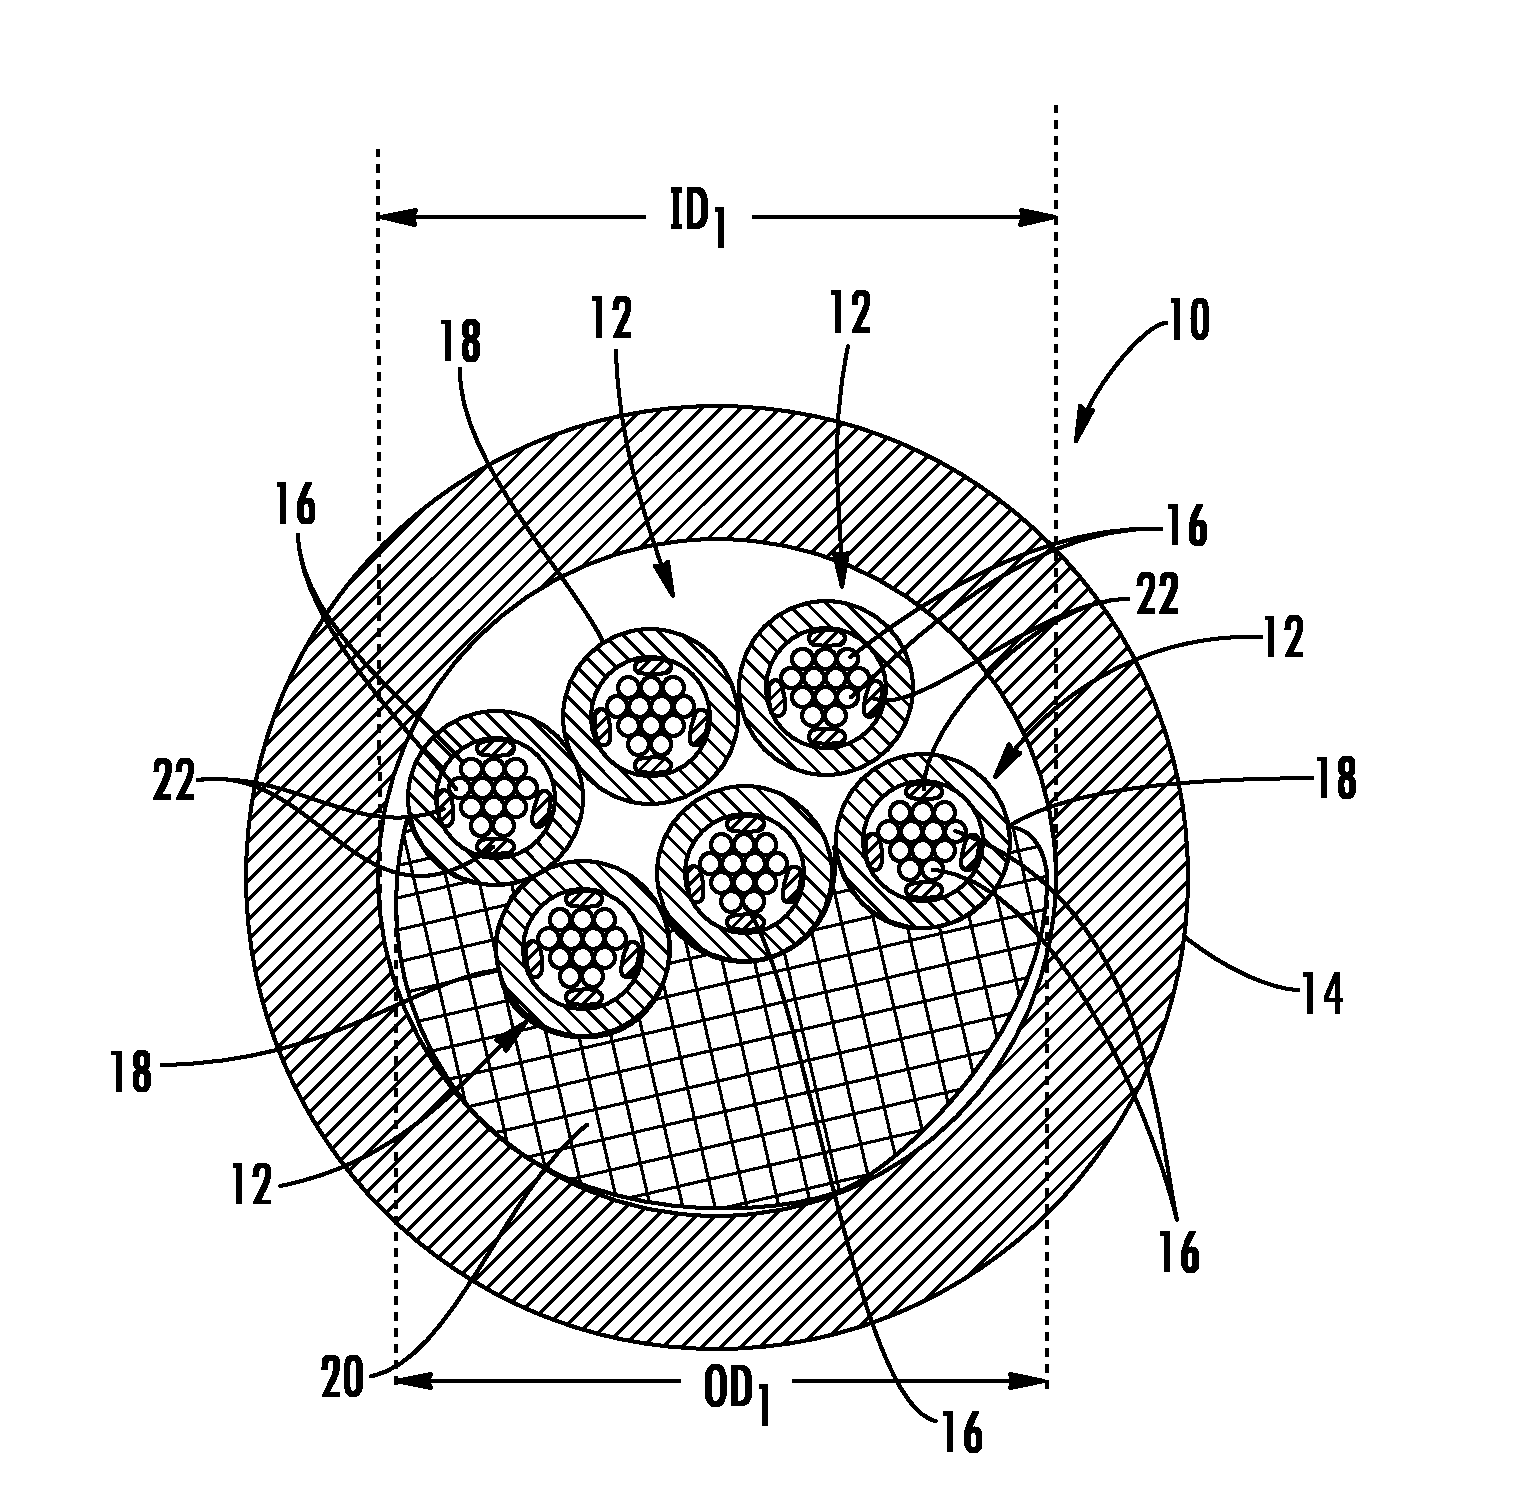 Multi- fiber, fiber optic cable assemblies providing constrained optical fibers within an optical fiber sub-unit, and related fiber optic components, cables,  and methods